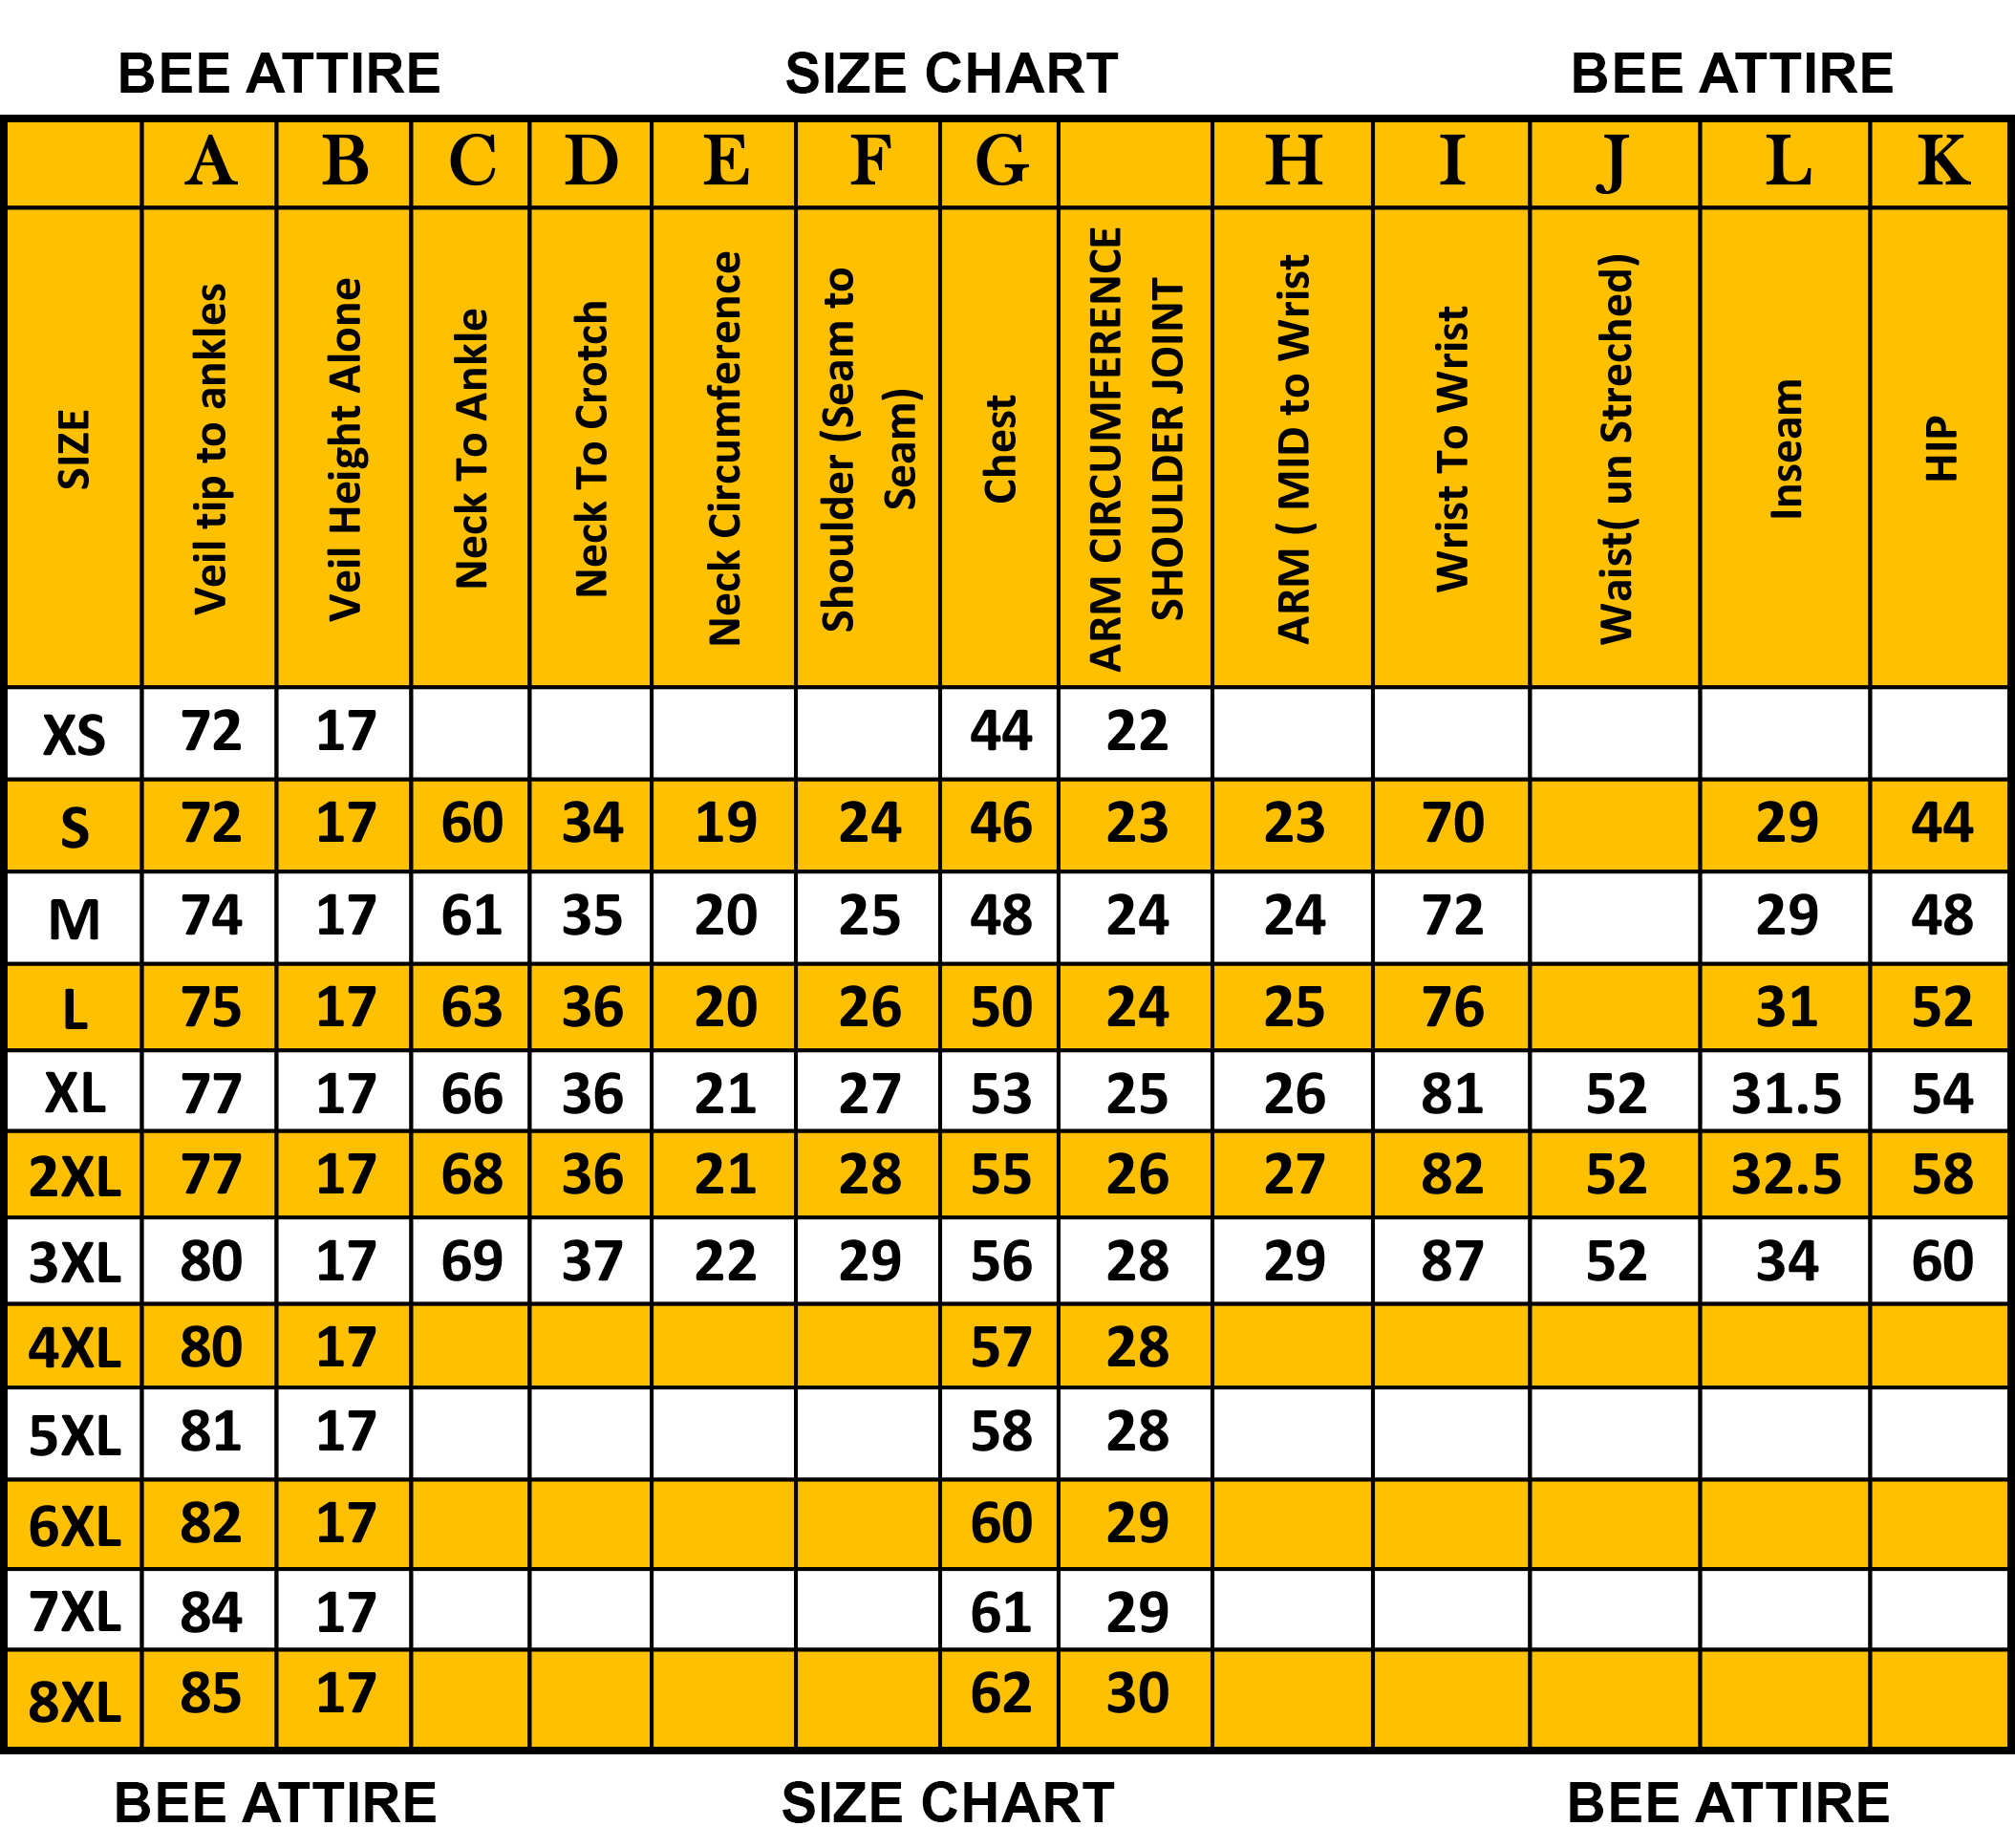 Bee Suit Size Chart